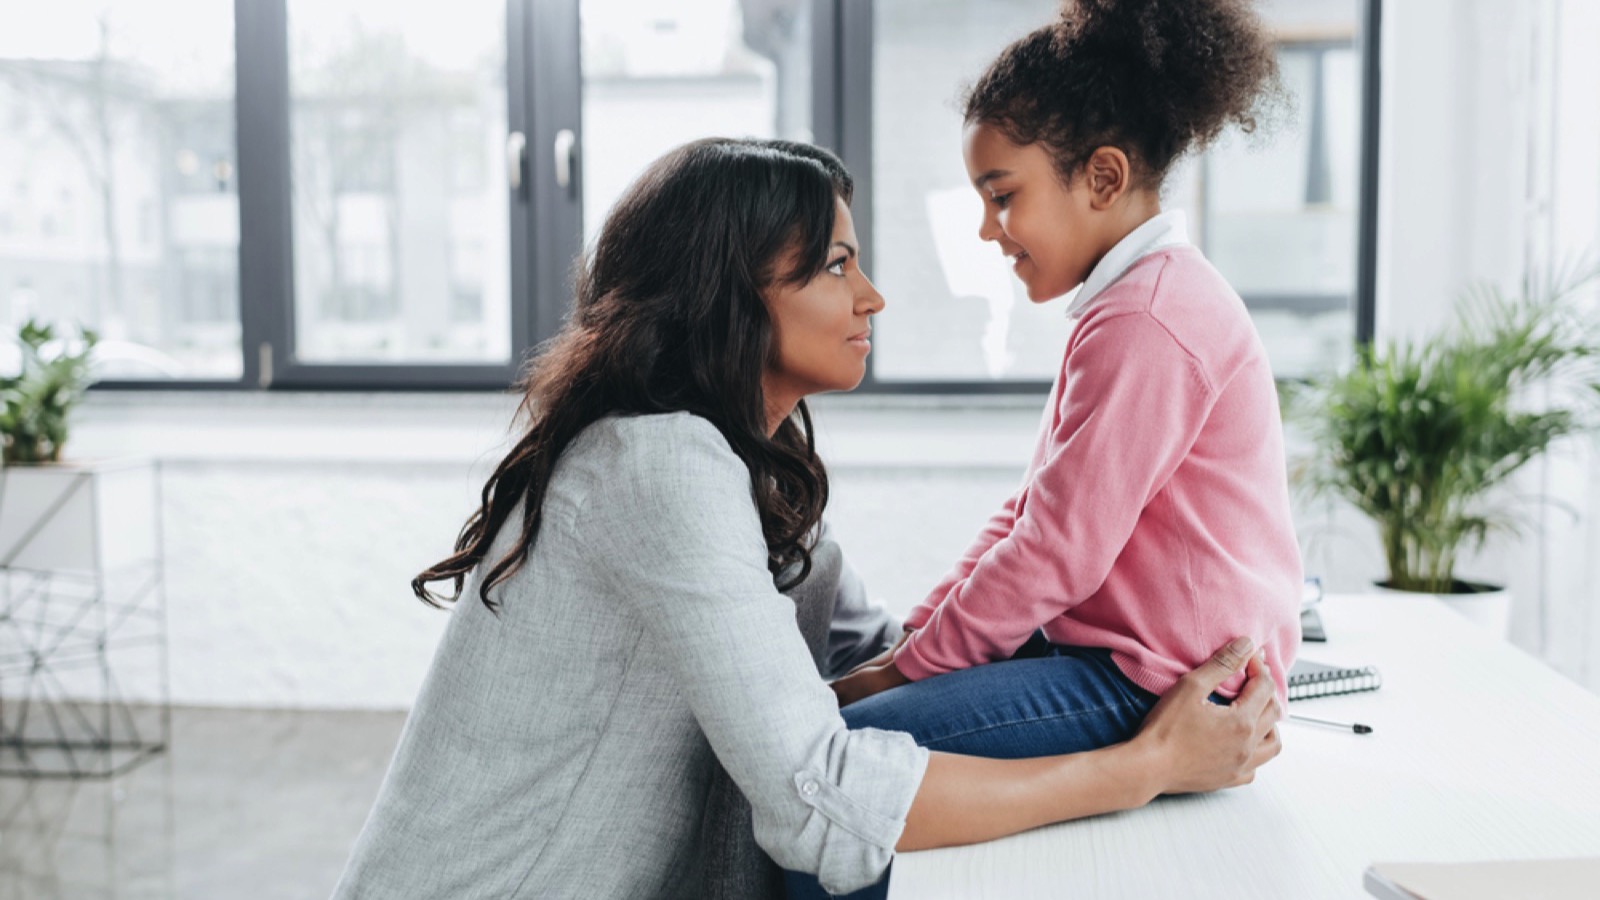 Mother talking to daughter boosting confidence